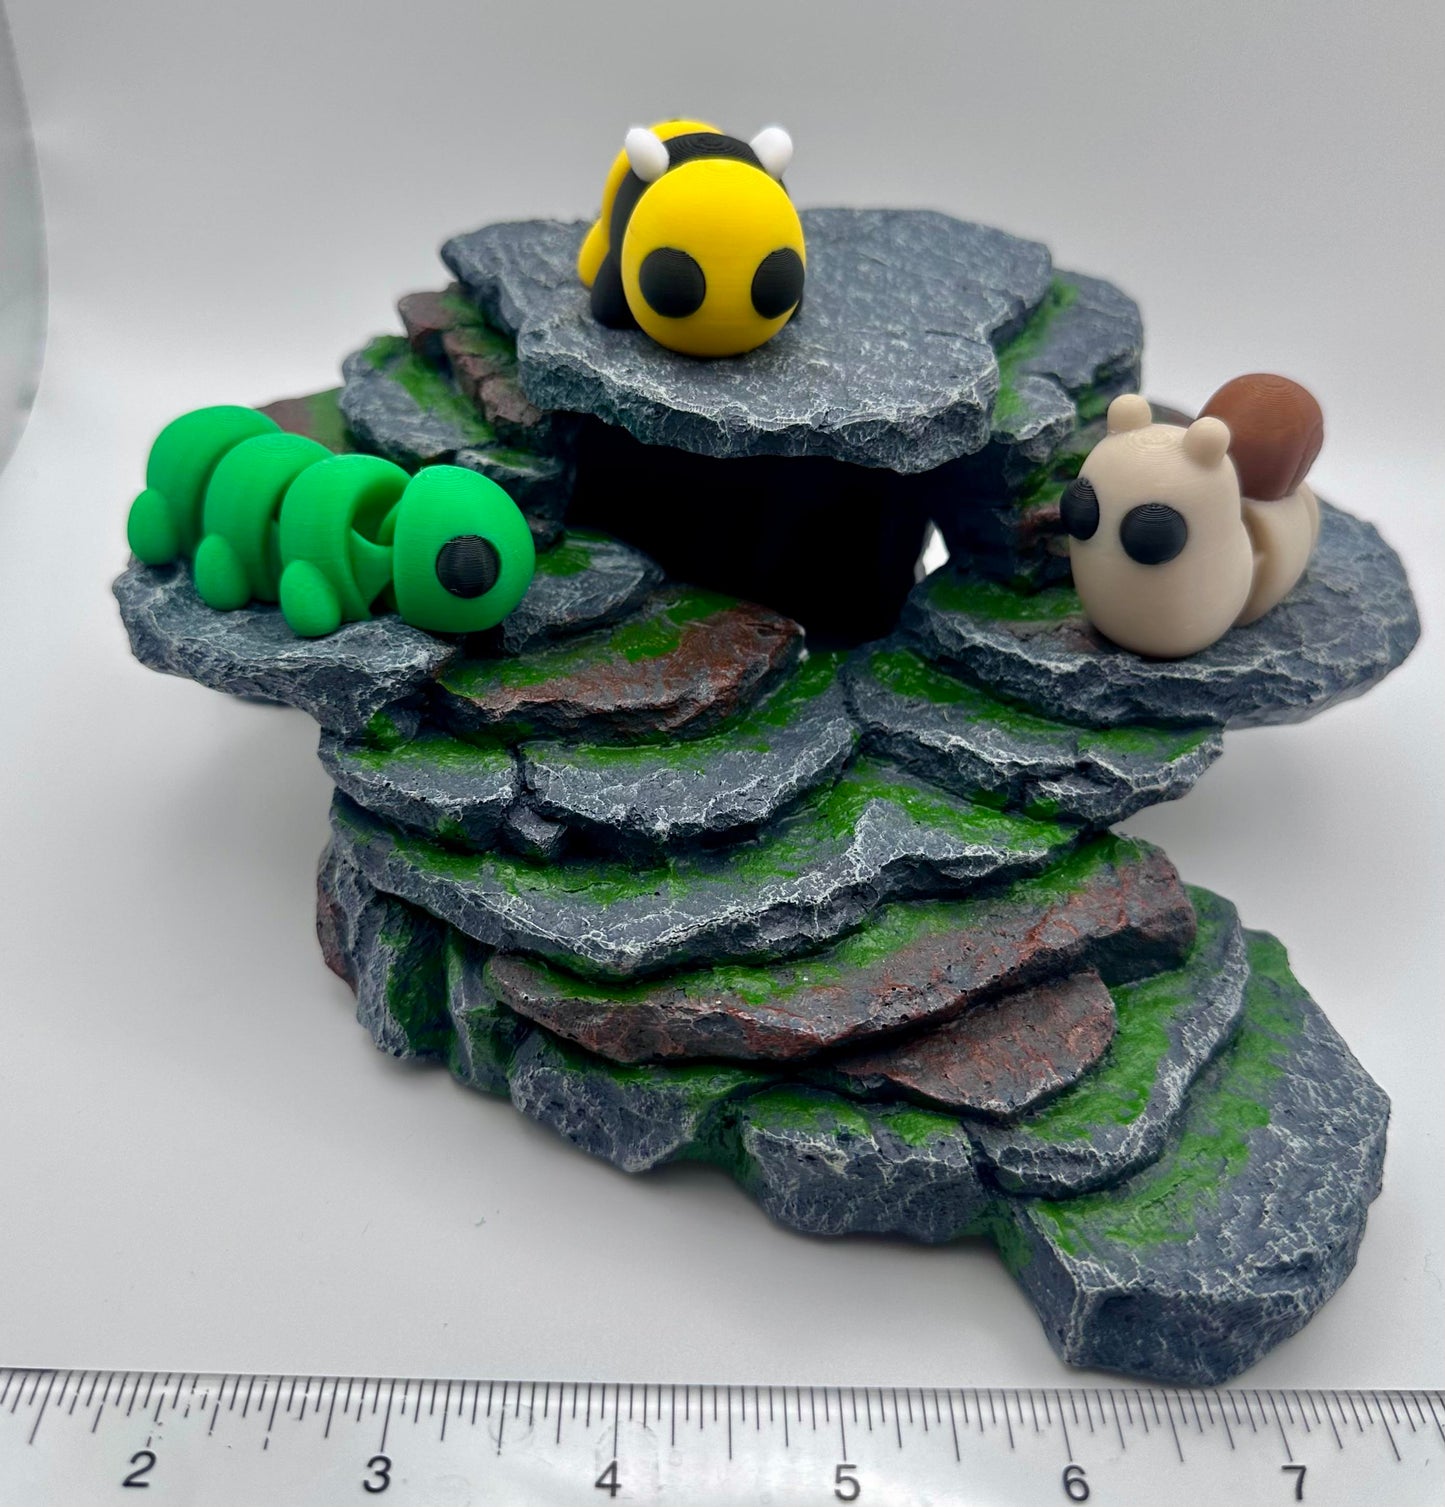 3D Printed Articulating Forest Creature Trio Set with Snail, Caterpillar, and Bee